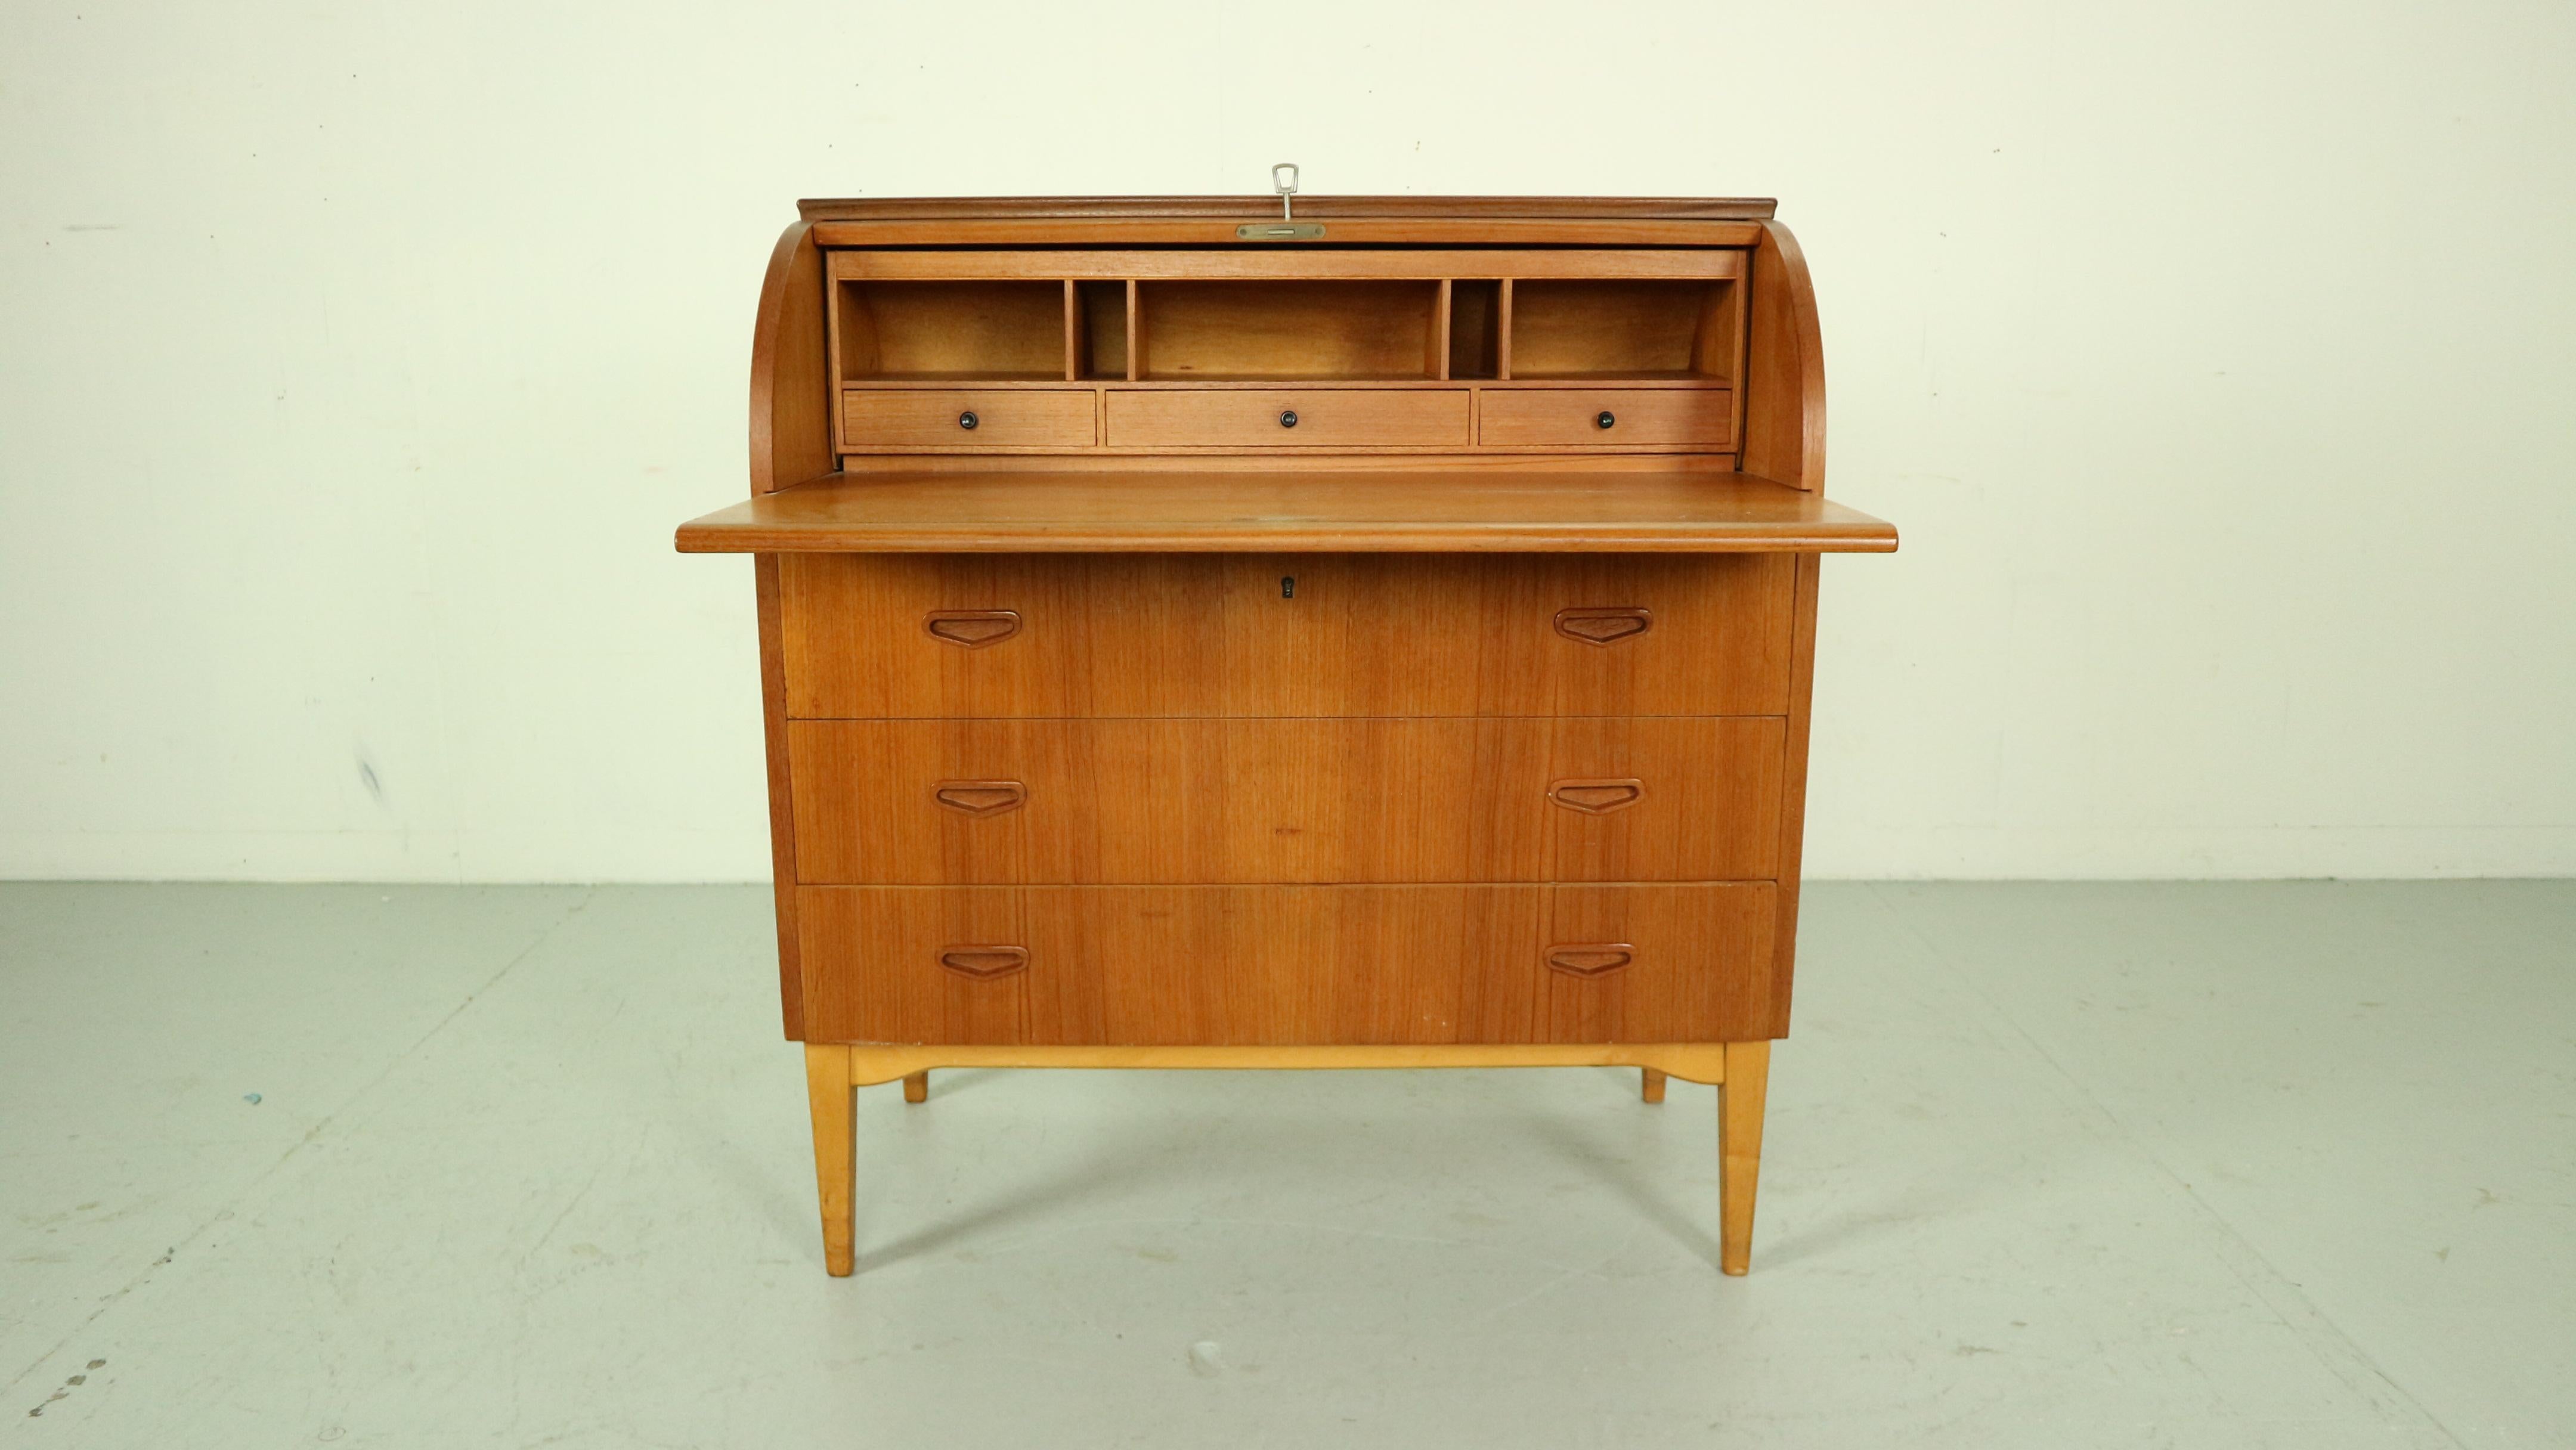 Mid- Century modern period teak cylinder rolltop secretary/ desk or just a cabinet is made in 1970s, Sweden.
By Egon Ostergaard designer and manufactured by Markaryds Mobelindustri manufacture.

The Classic Scandinavian Modern design has clean